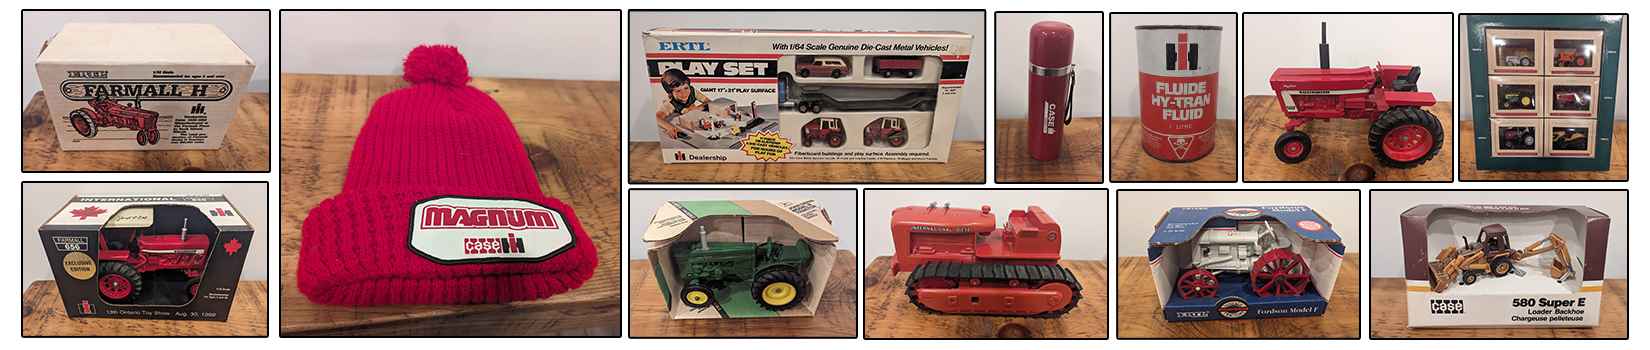 Online Collectibles Auction, Farm Toys, Construction Toys, Buyers Guides, Posters, Memorabilia and other Collectibles